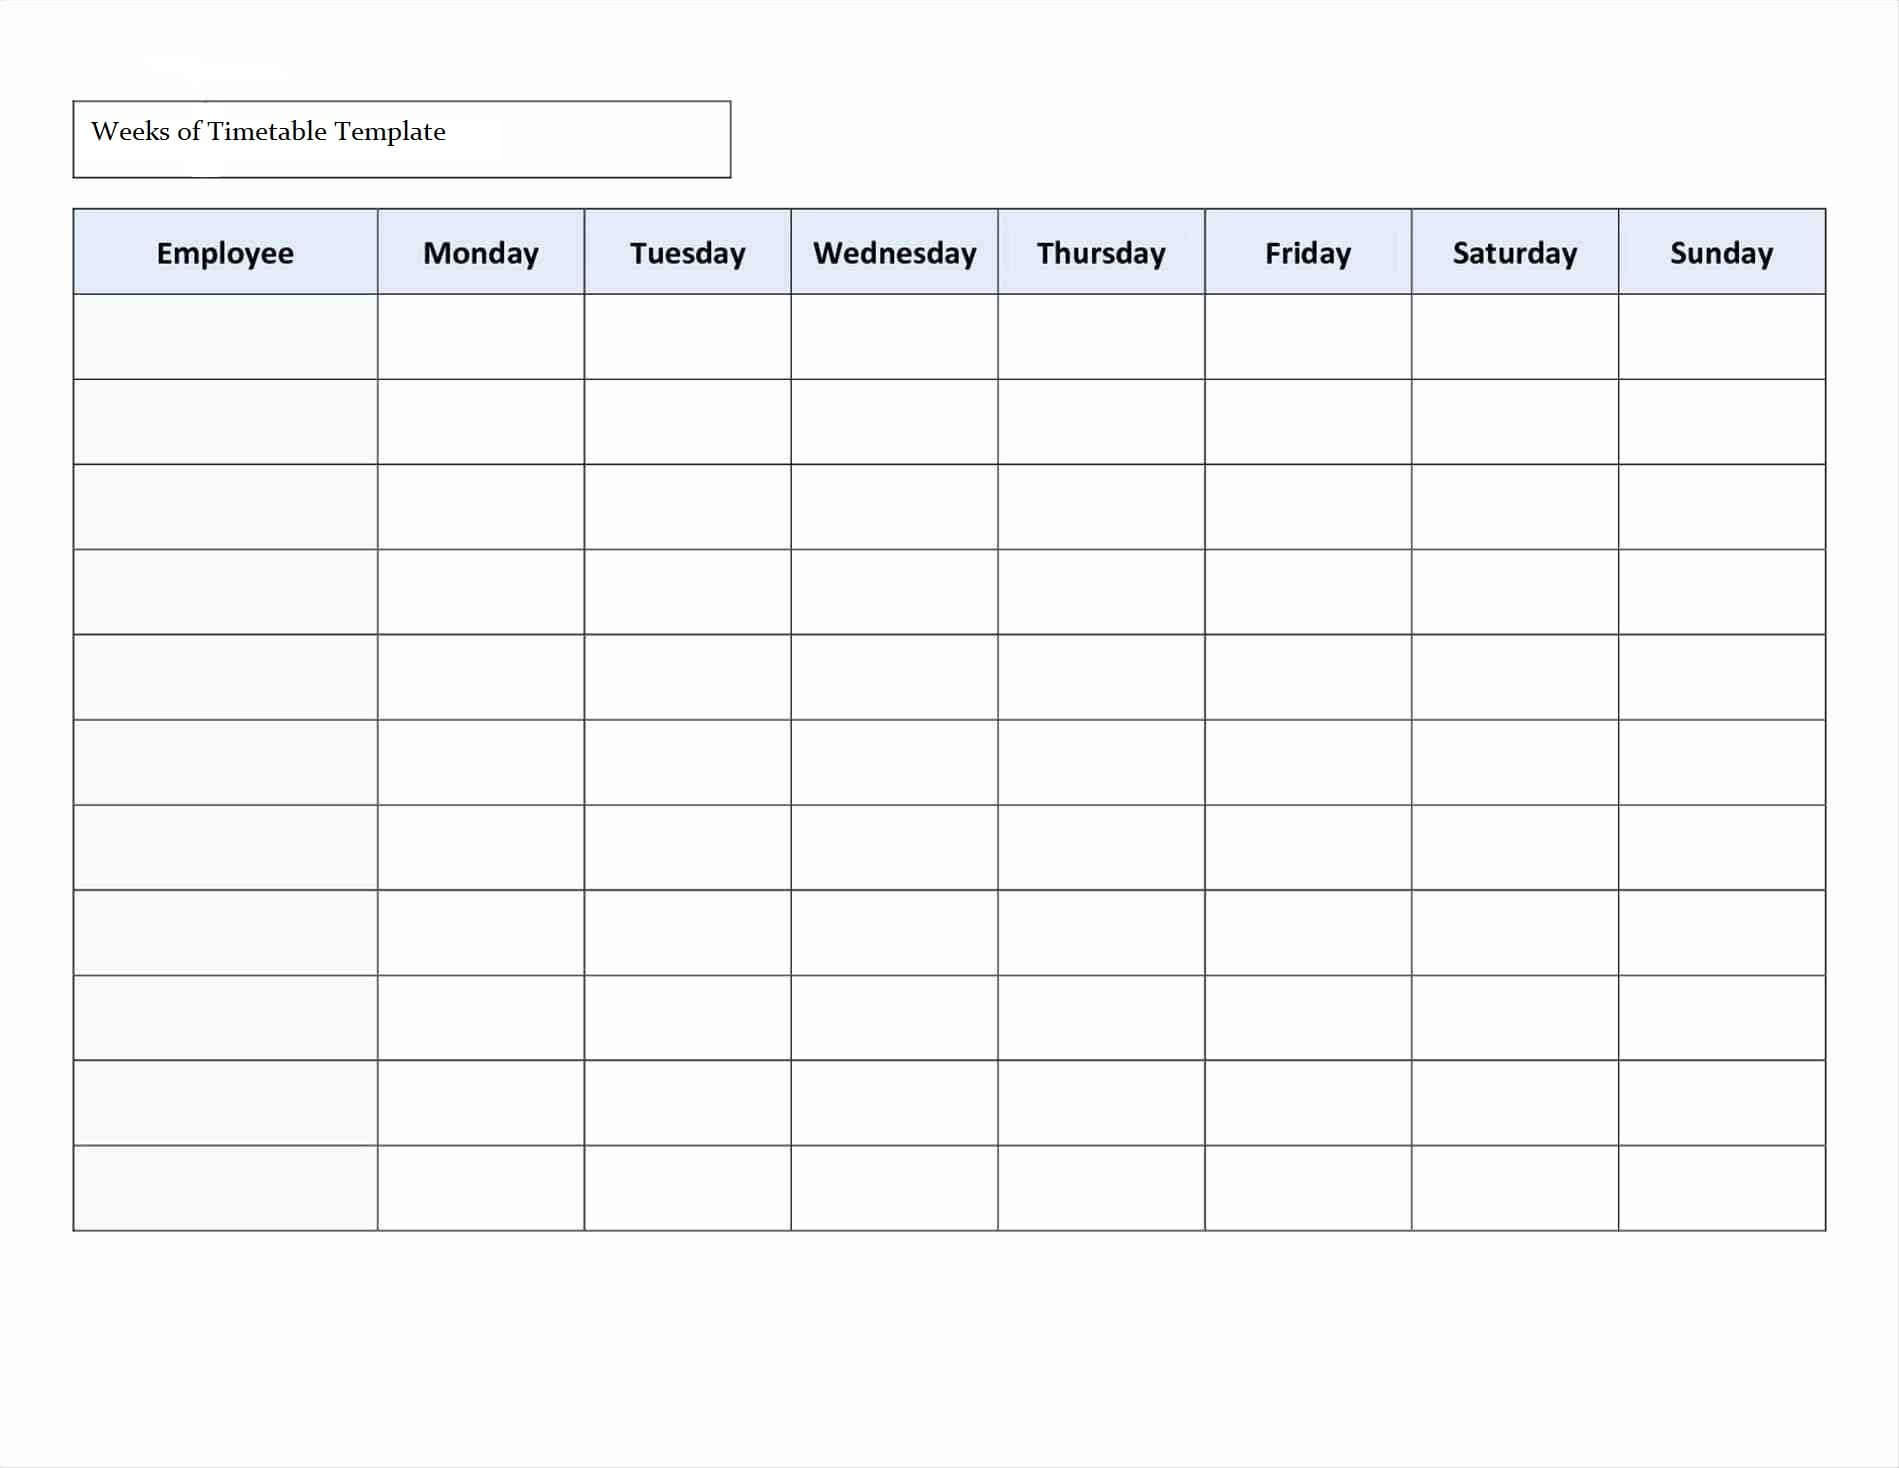 Timetable Template #dailytimetabletemplate | Schedule With Blank Revision Timetable Template